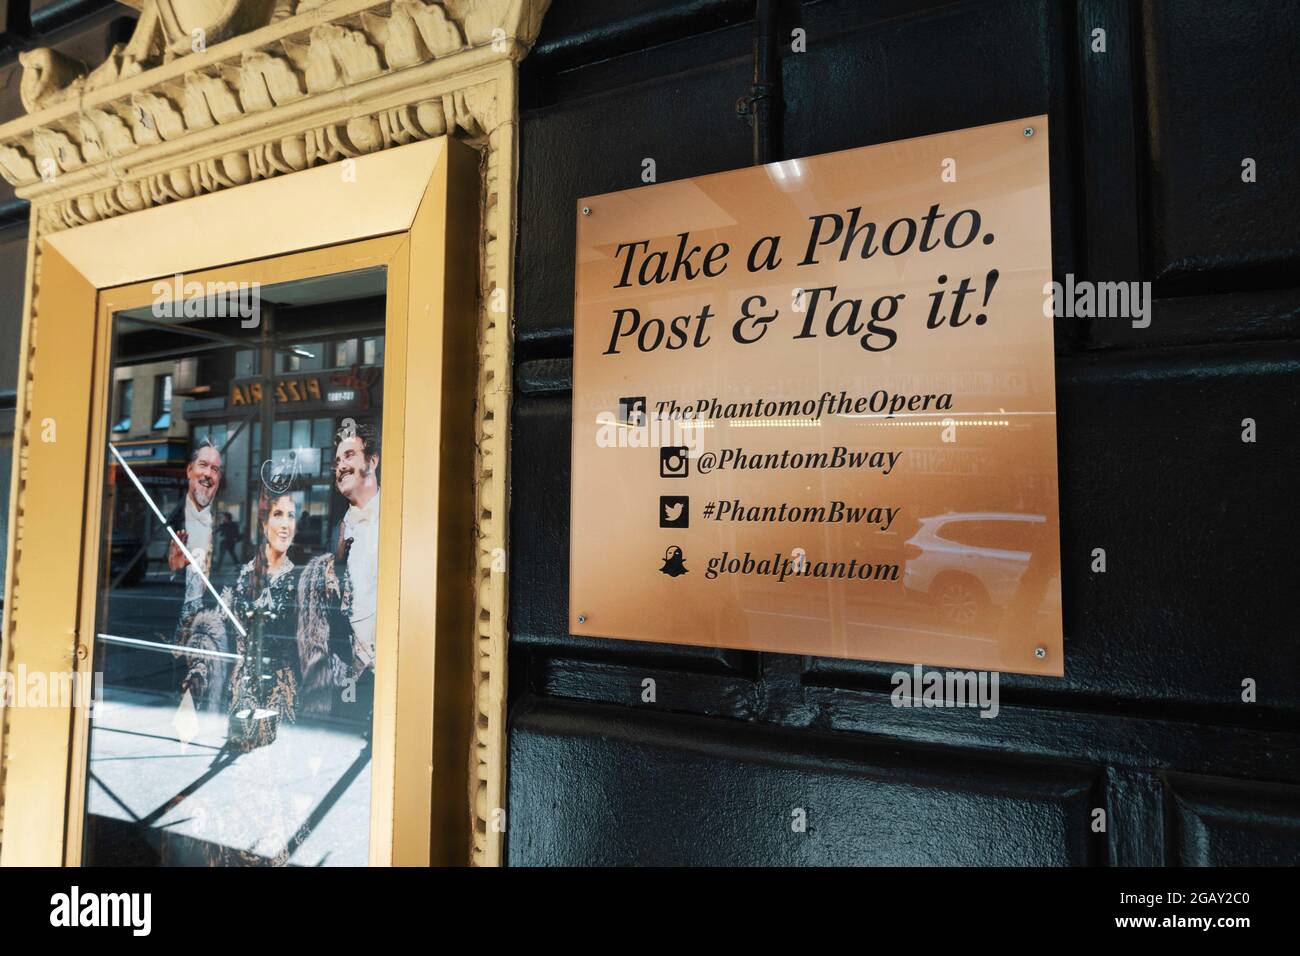 'Phantom of the Opera' Social Media Photo Sign at The Majestic Theatre, 245 W. 44th Street, Times Square, NYC Stock Photo